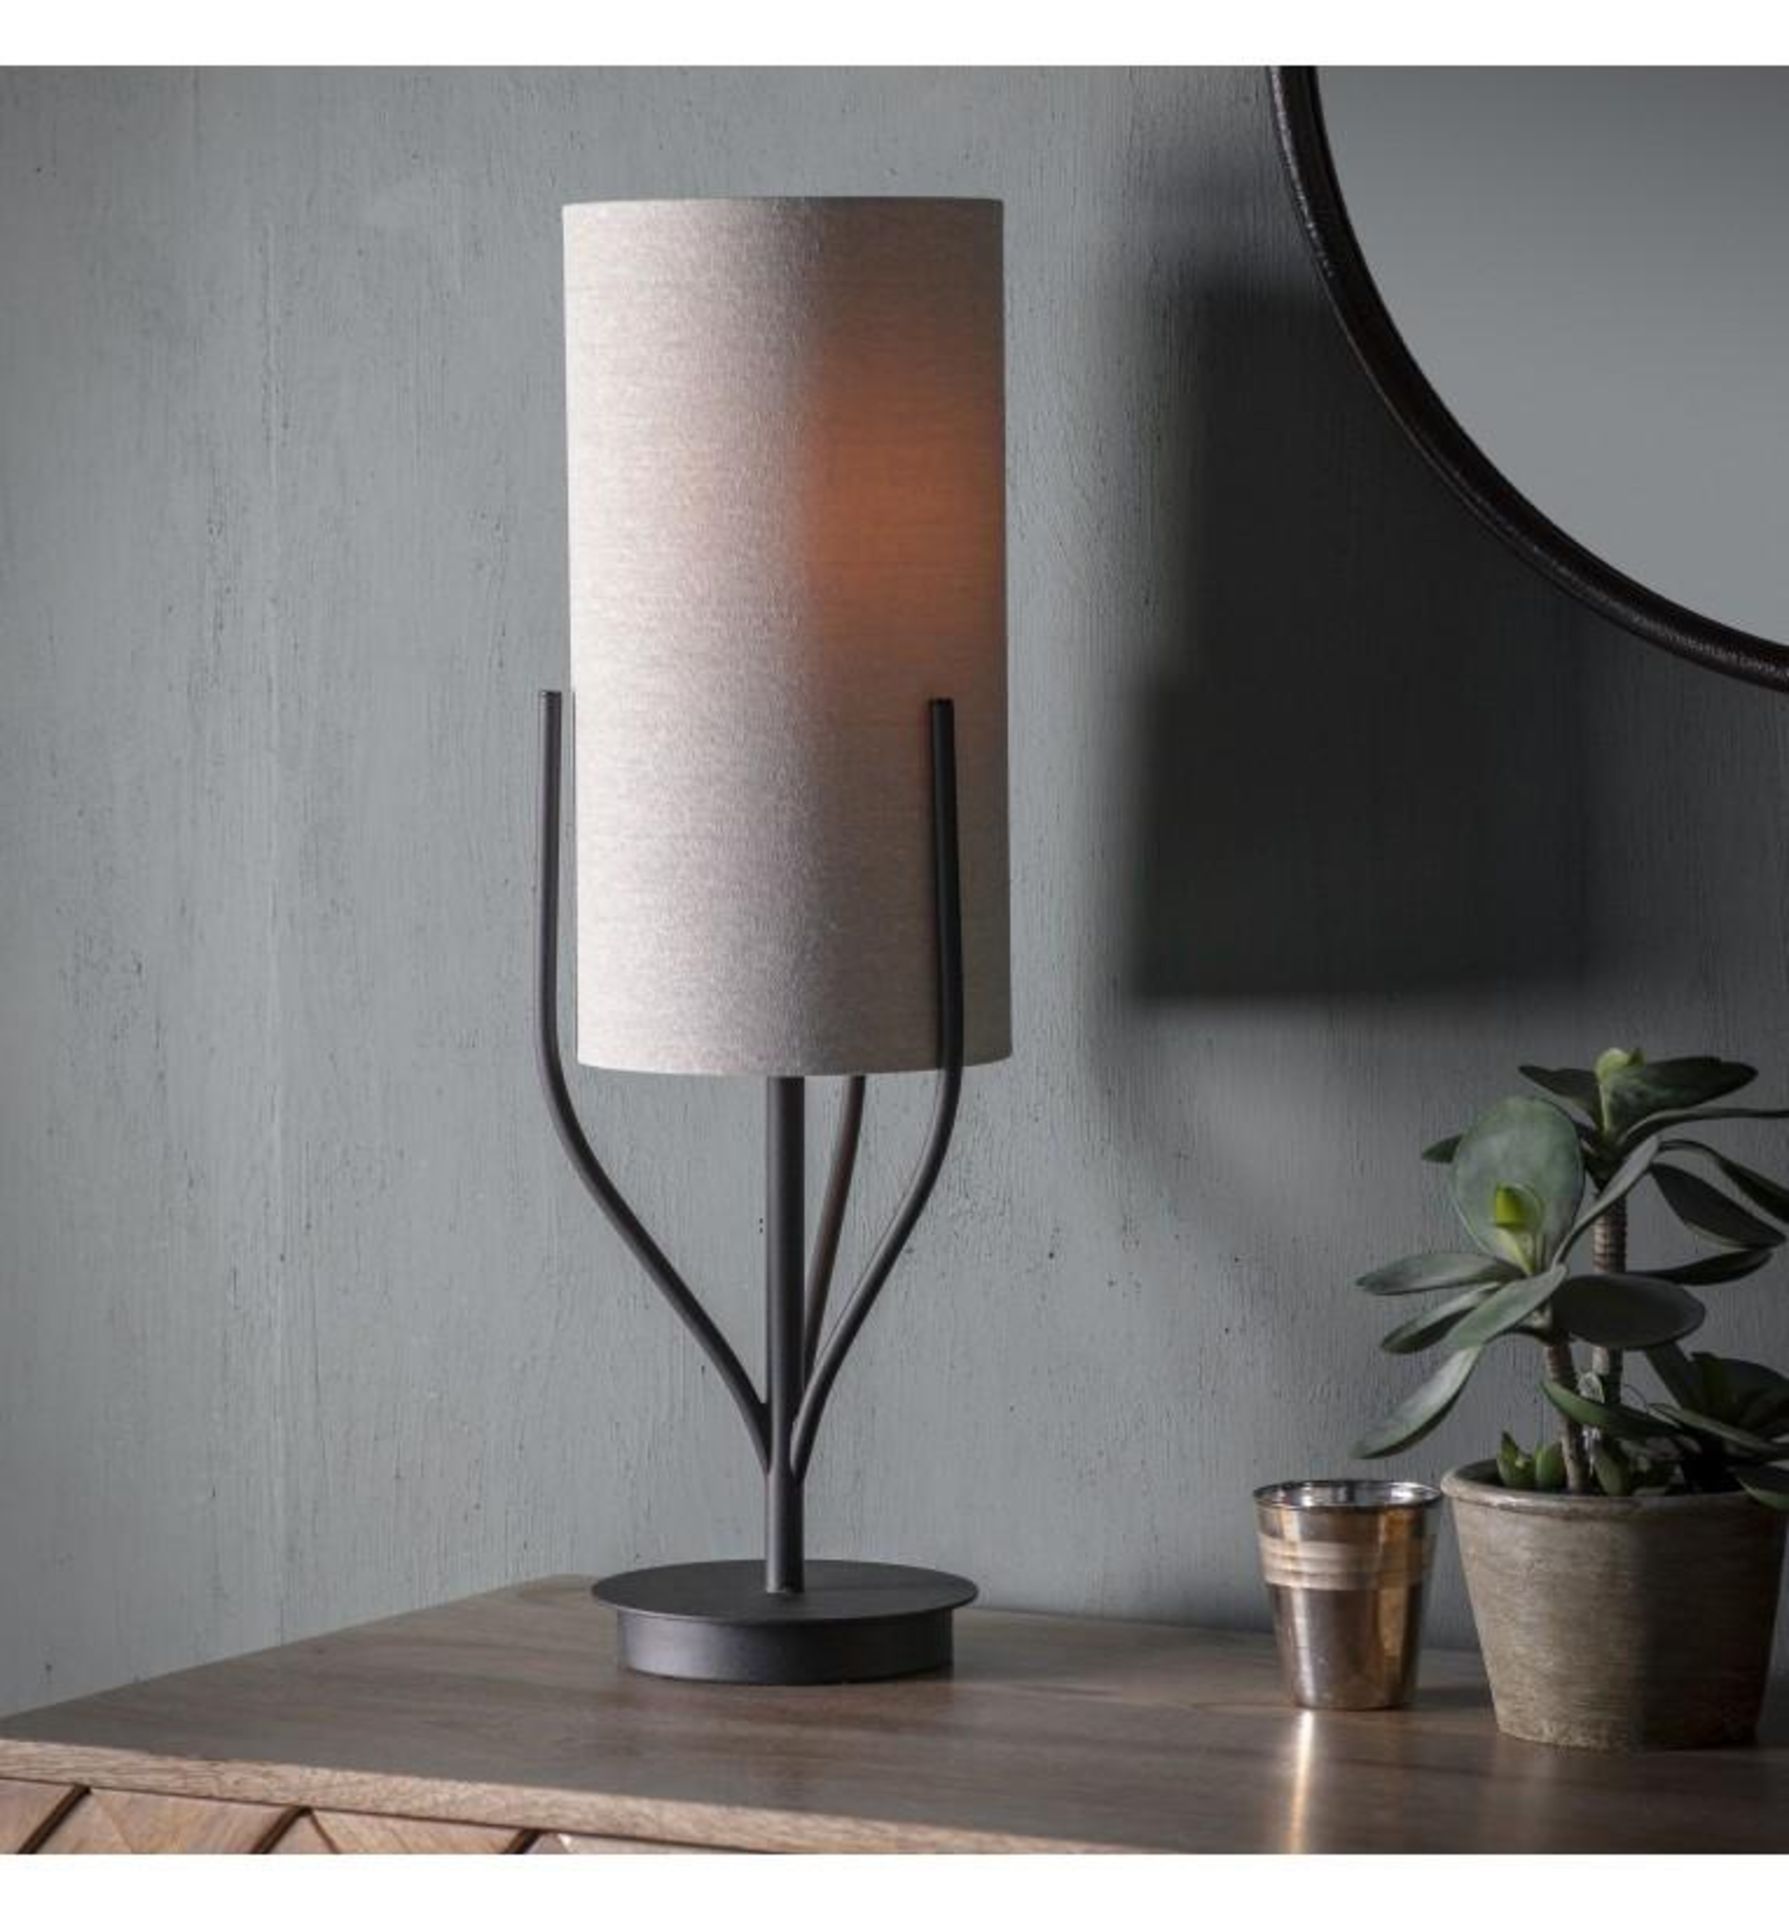 Romana Table Lamp Black Spruce up any table or desk area by welcoming this stunning table lamp.